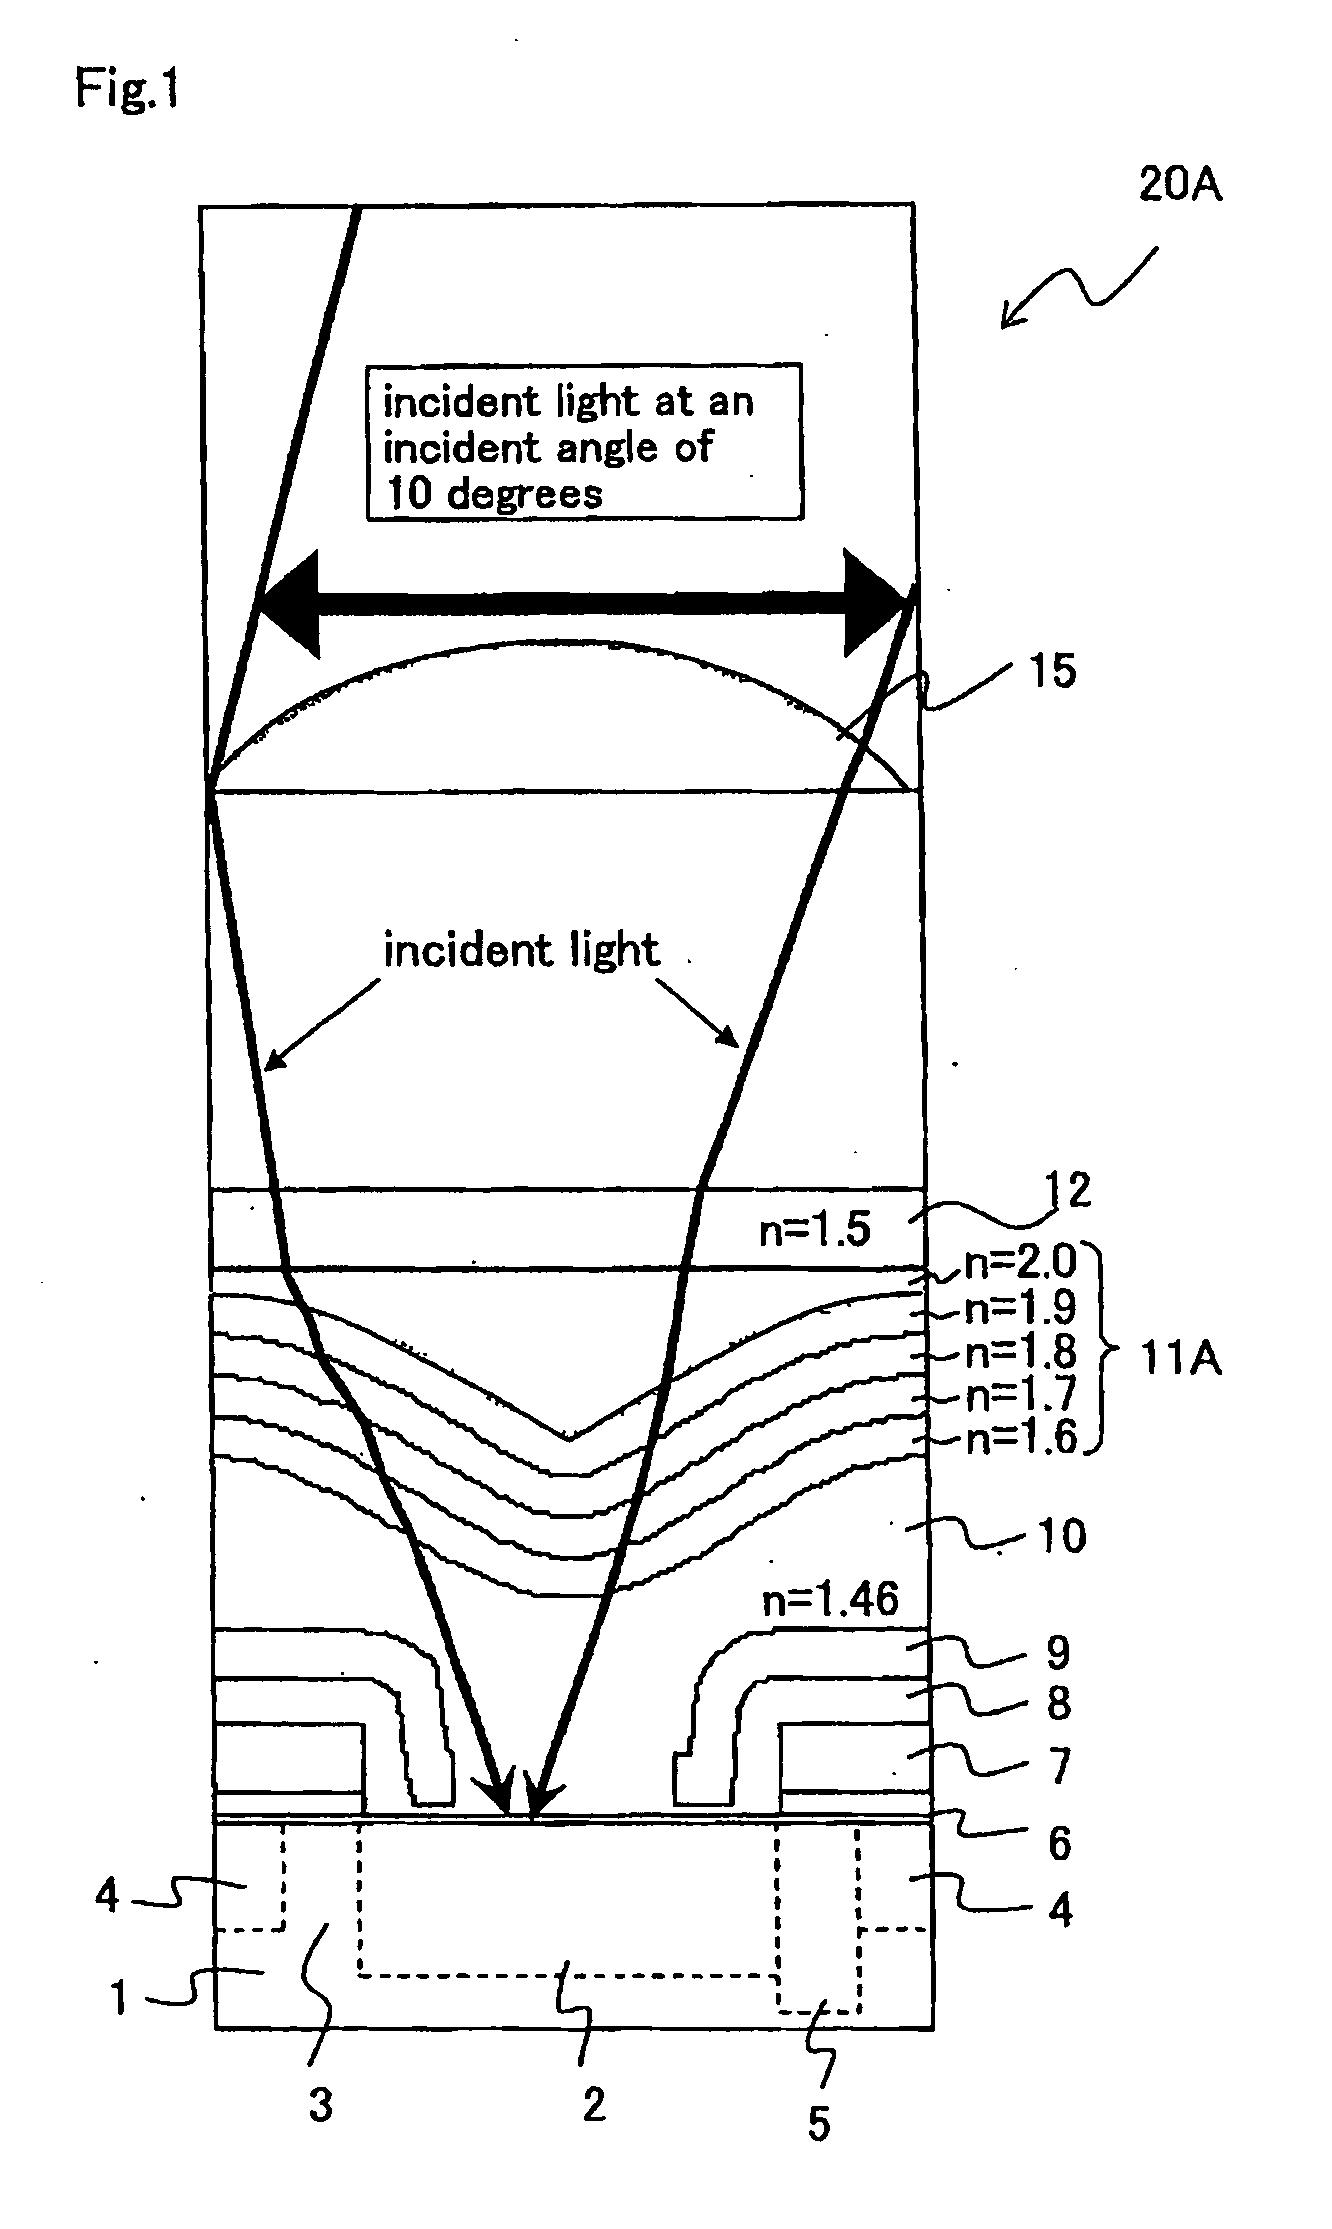 Solid-state image capturing device, manufacturing method of the solid-state image capturing device, and electronic information device